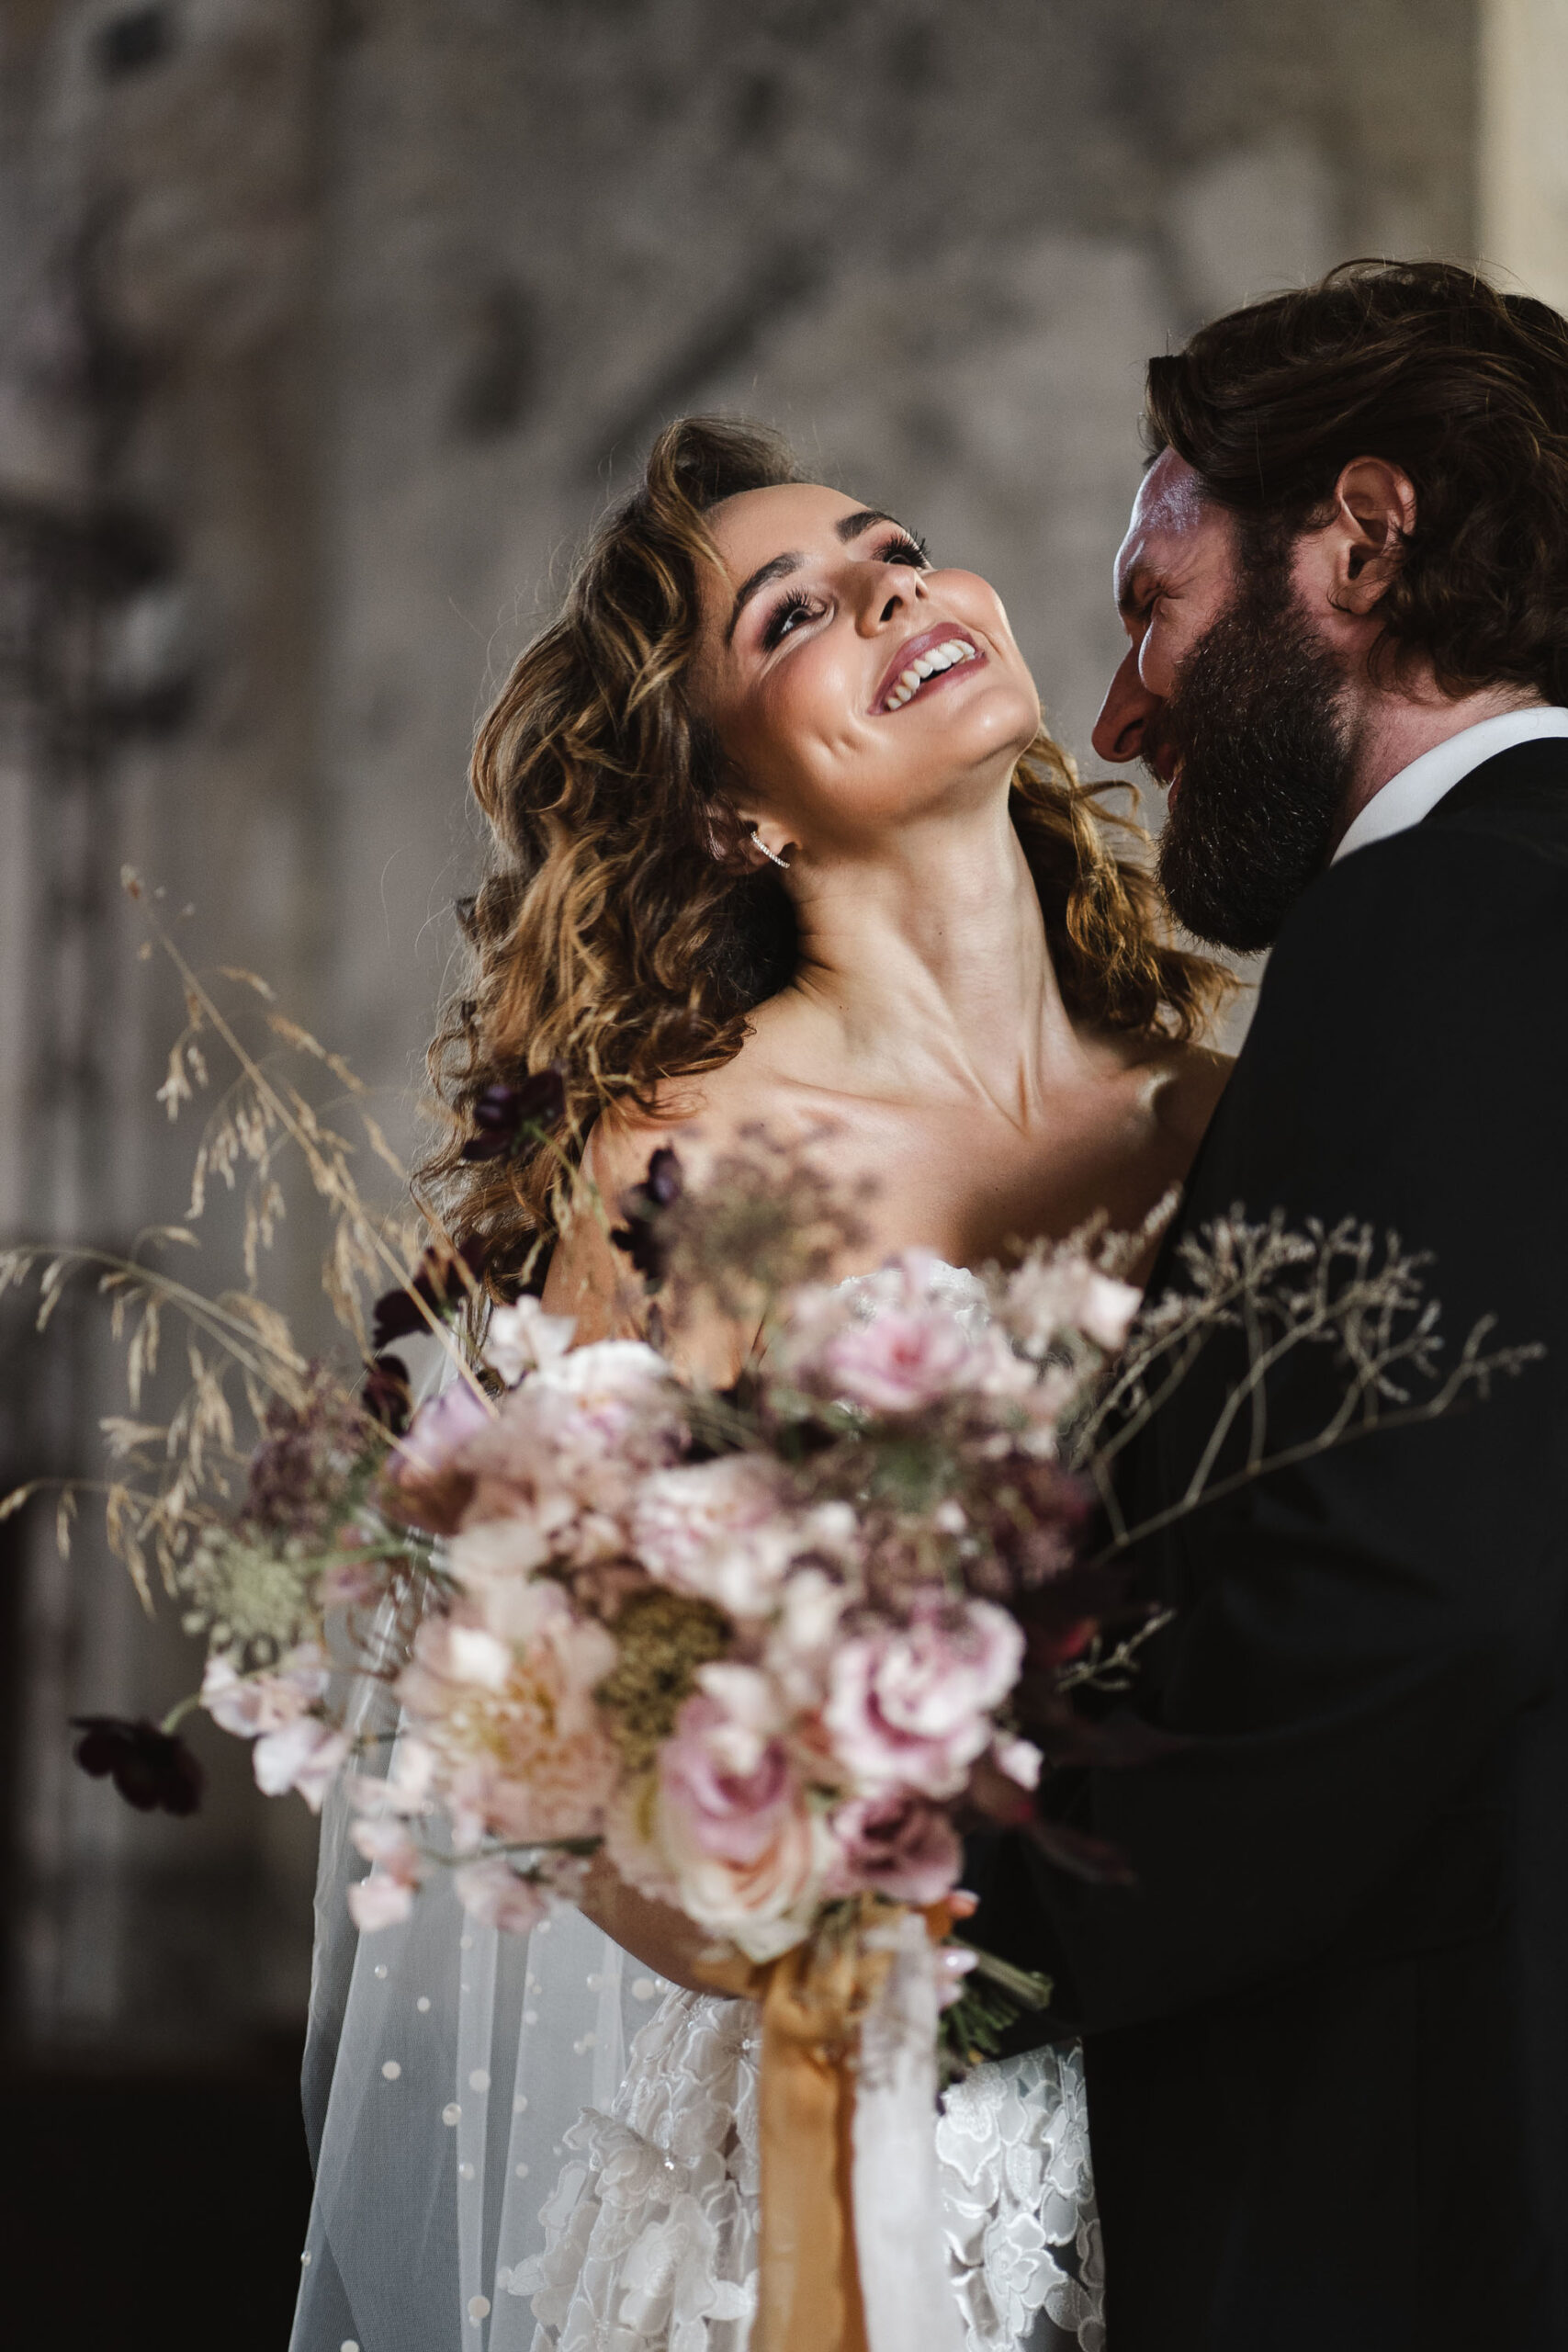 Photograph of a bride and groom. She's carrying a bouquet of pink flowers and grasses, and has lifted her head so he can kiss her neck. By Karolina Photography